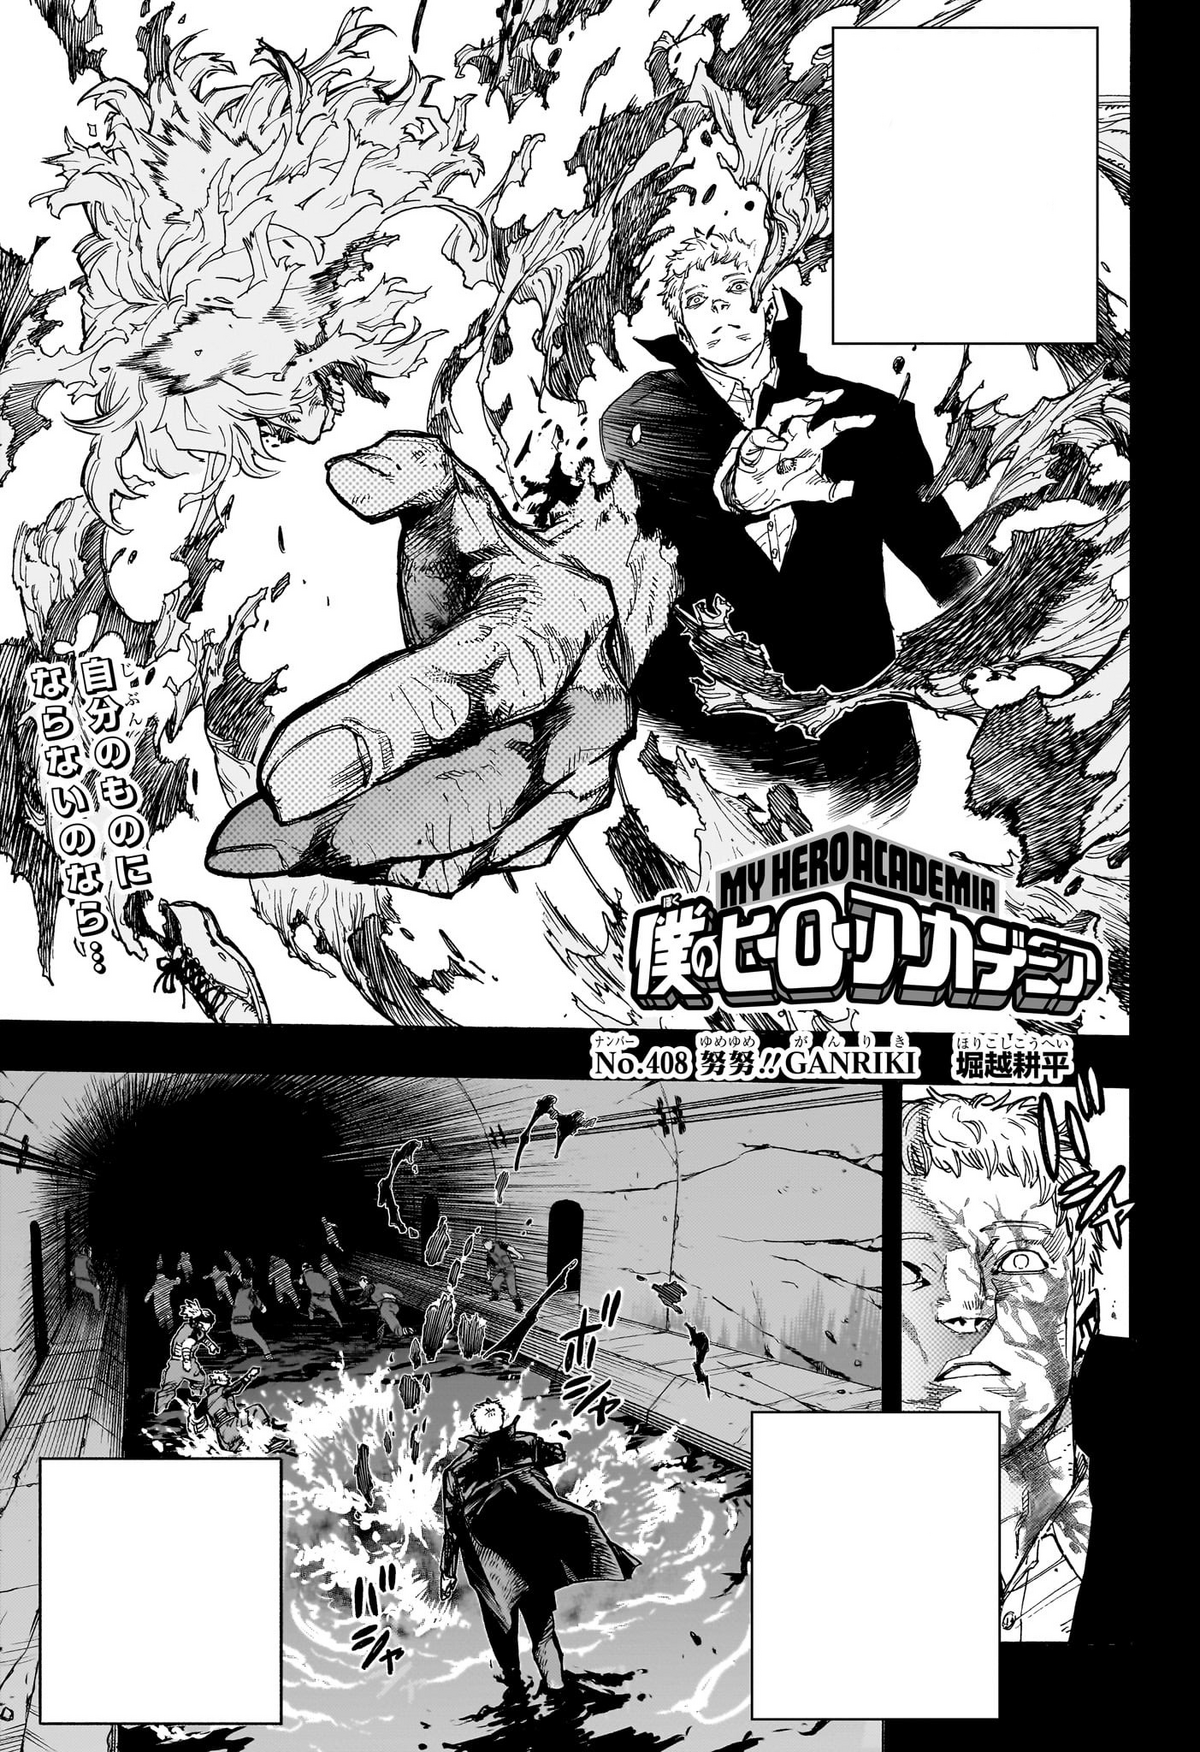 My Hero Academia Chapter 408 Full Plot Summary, Leaks and Spoilers